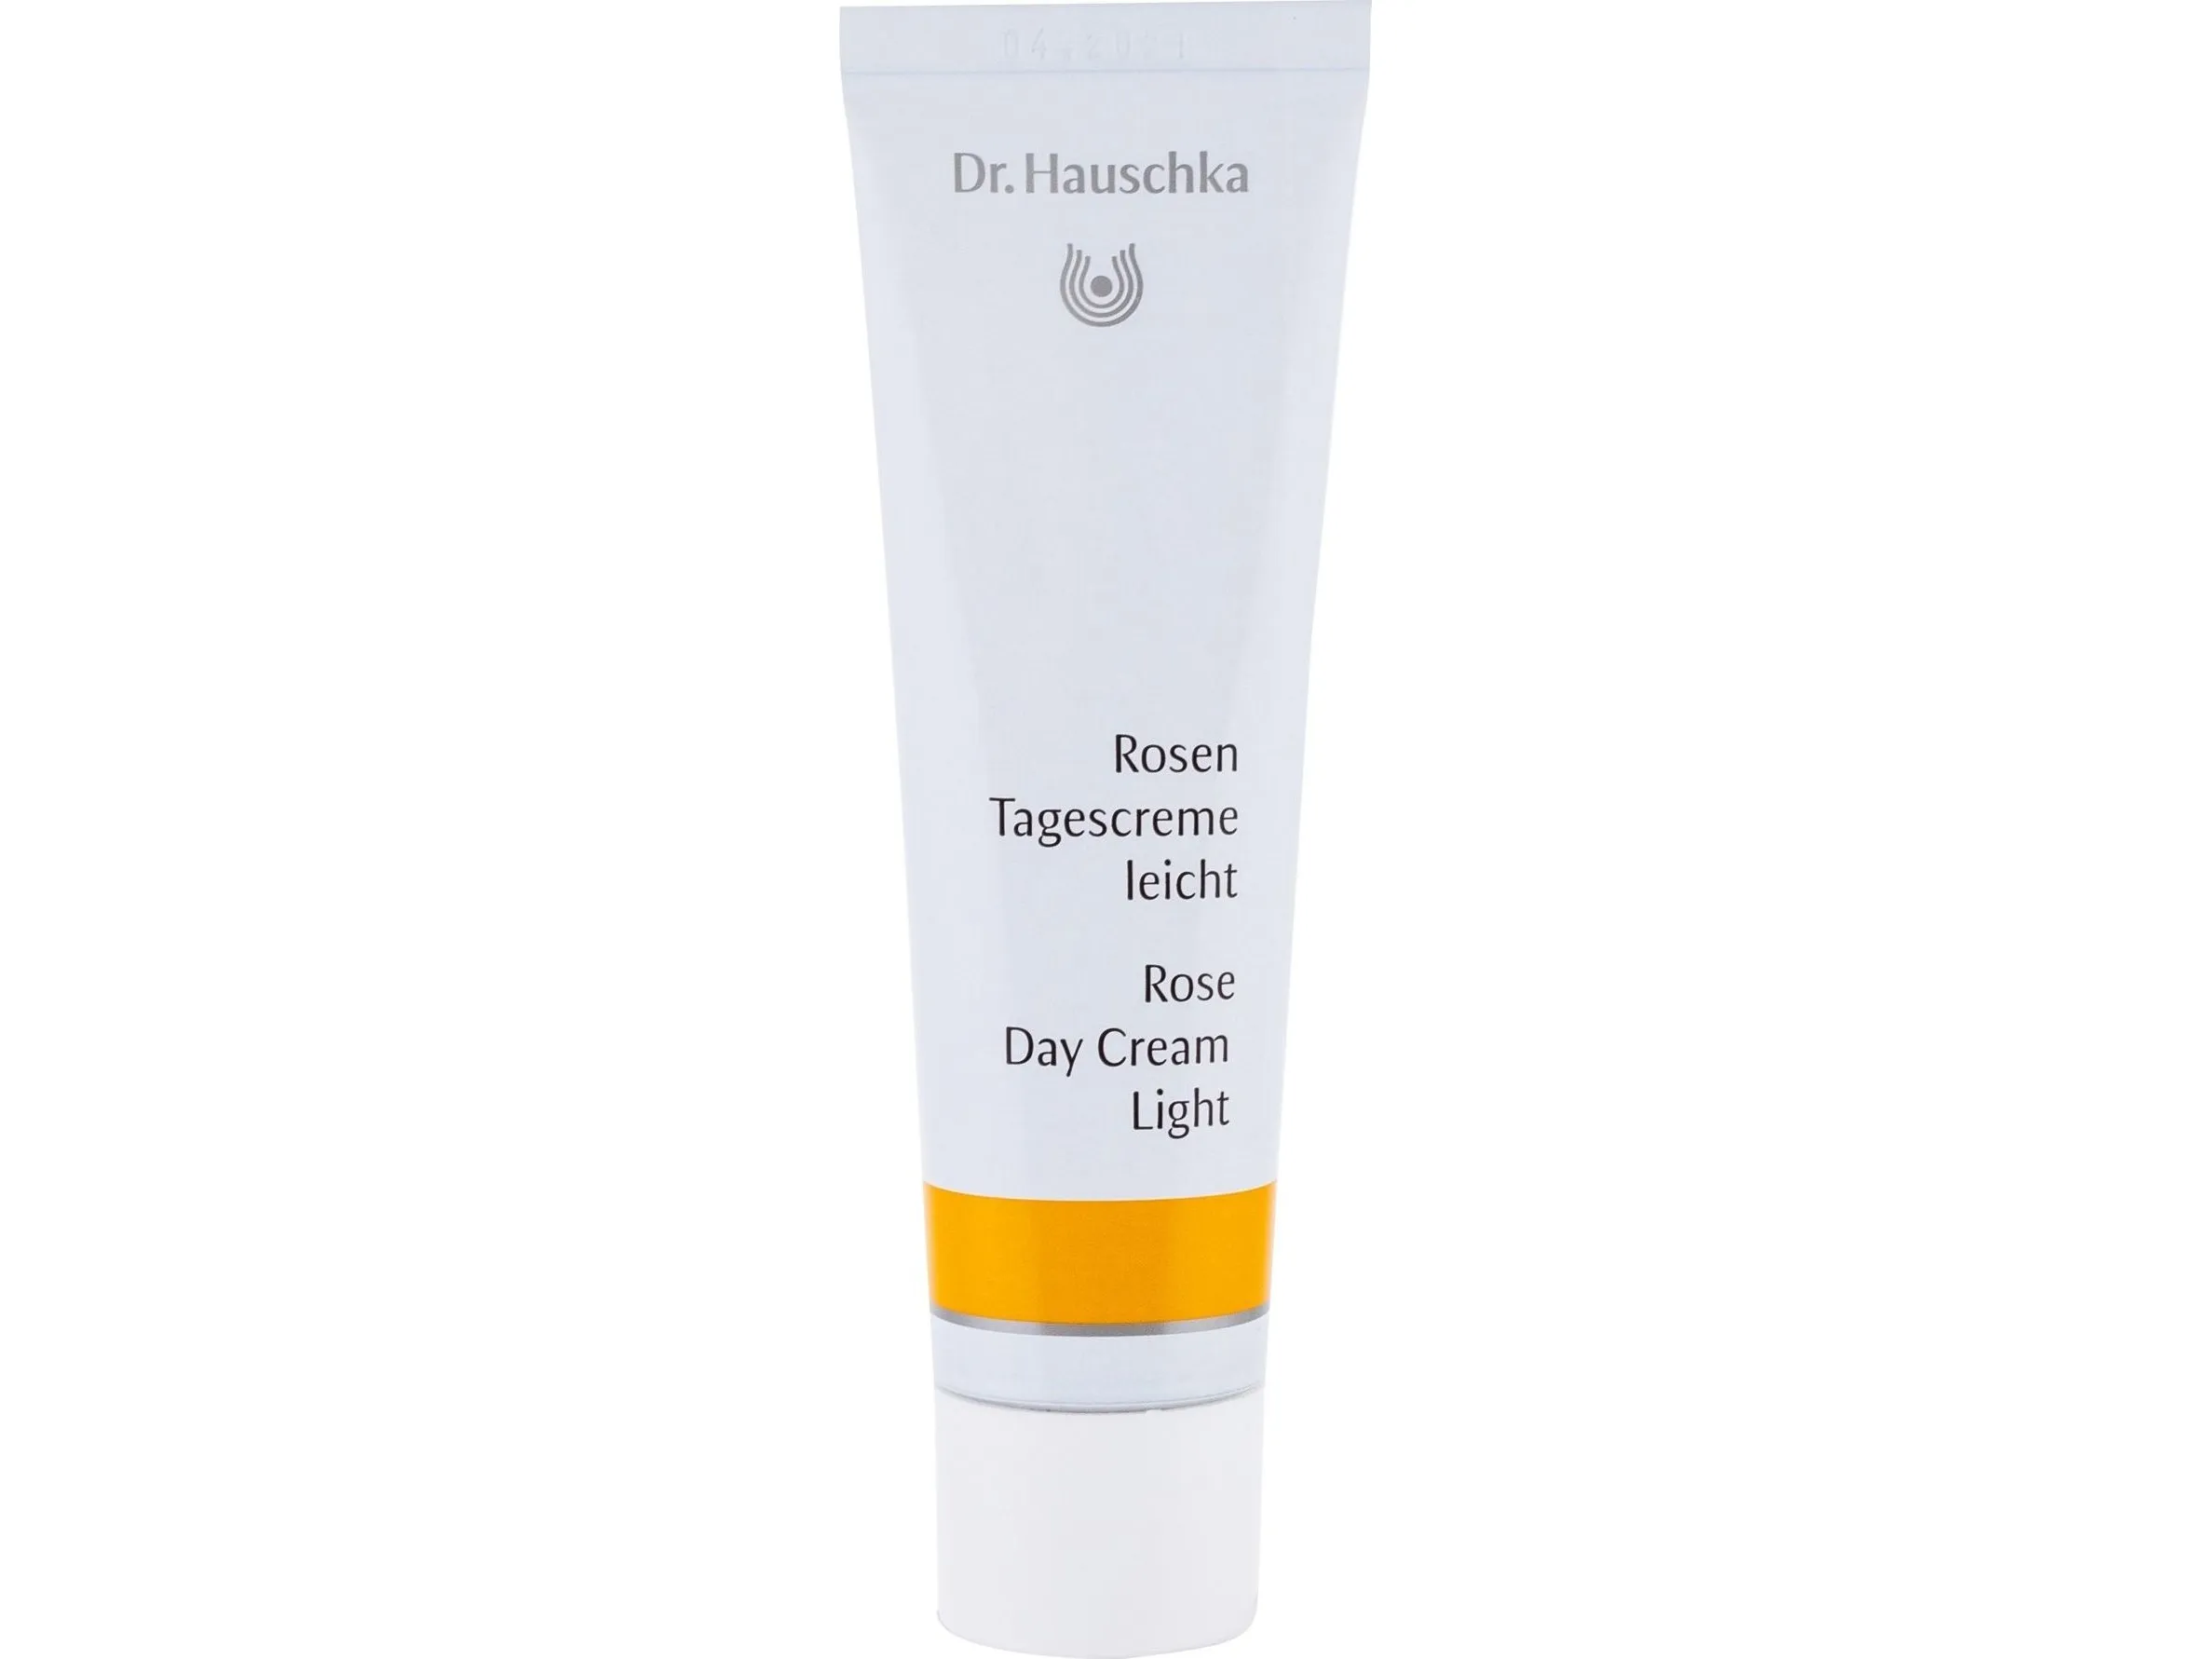 Hauschka DR. Day Cream Light light day cream with rose extract for sensitive skin 30ml